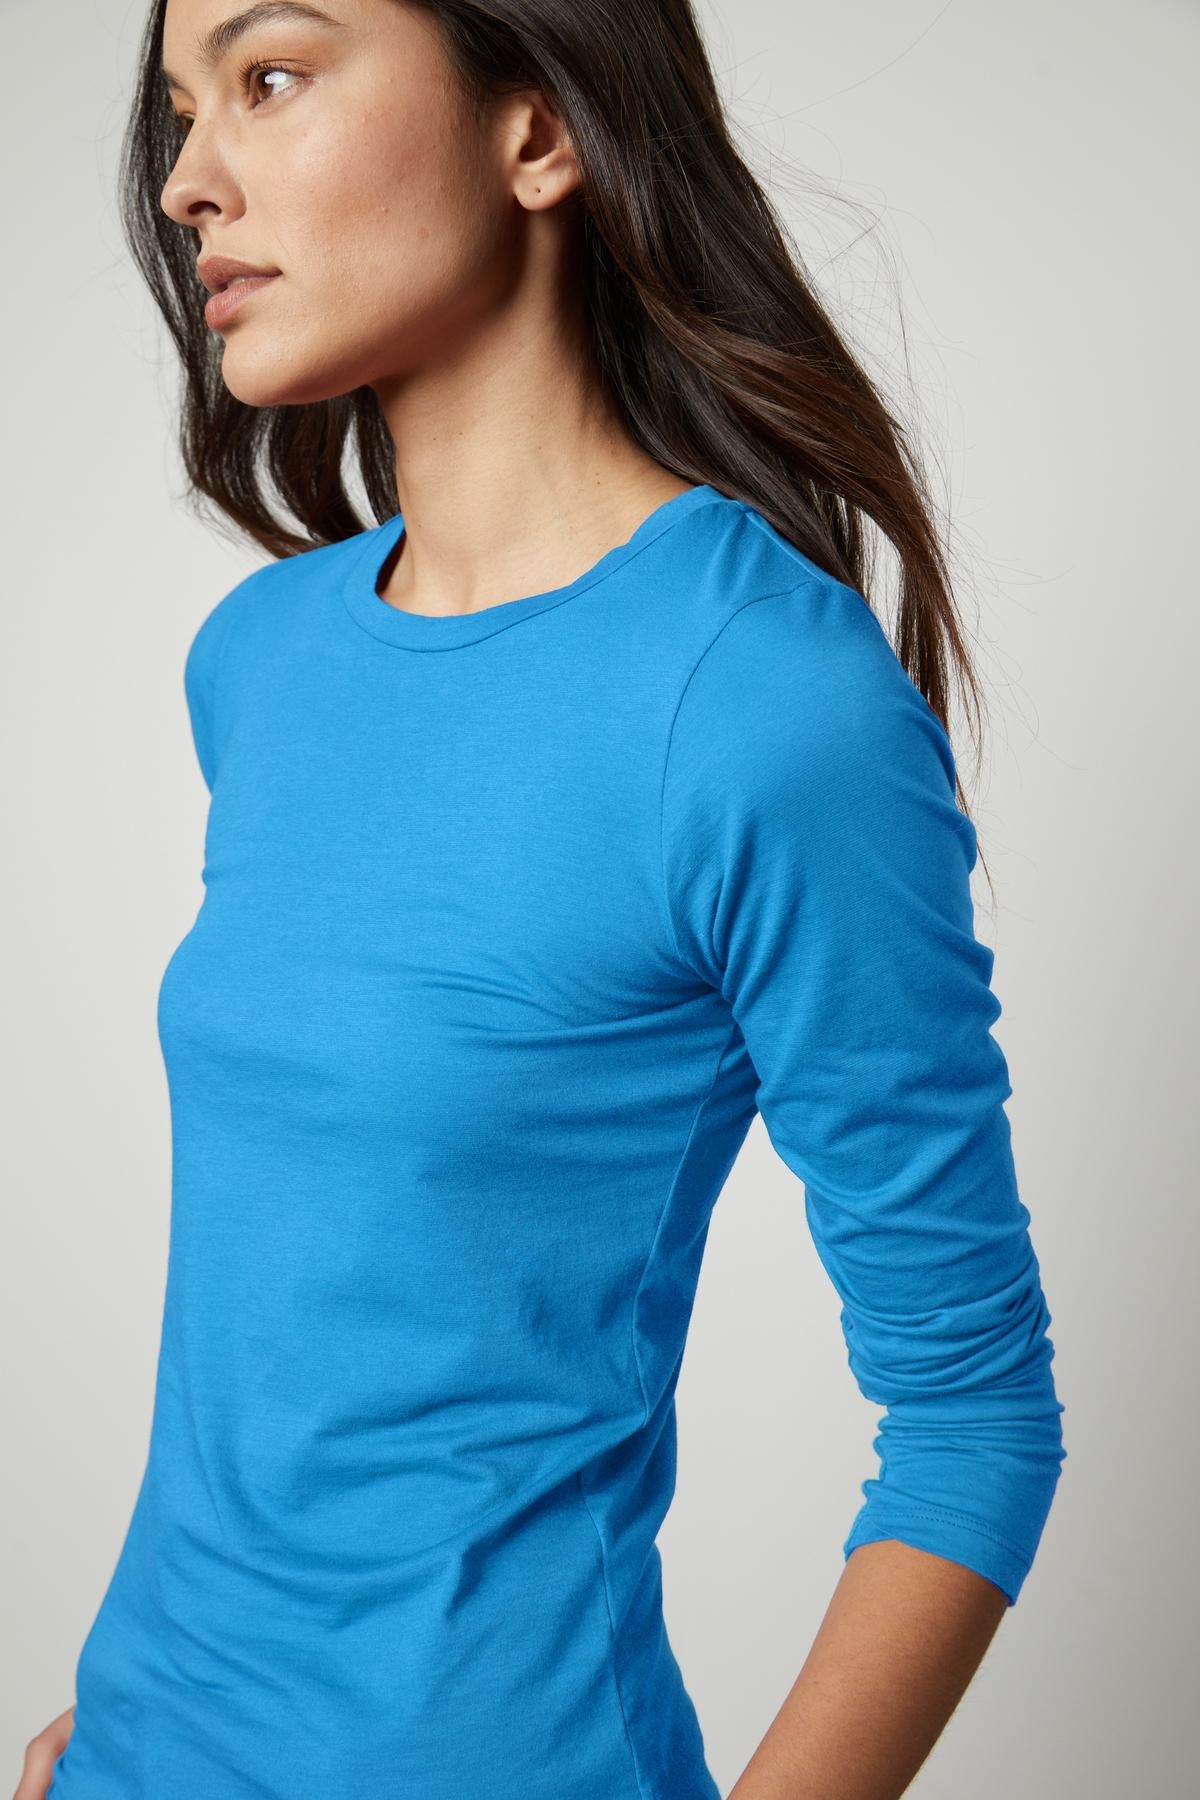 A woman wearing a Velvet by Graham & Spencer ZOFINA GAUZY WHISPER FITTED CREW NECK TEE-perfection.-36594704842945